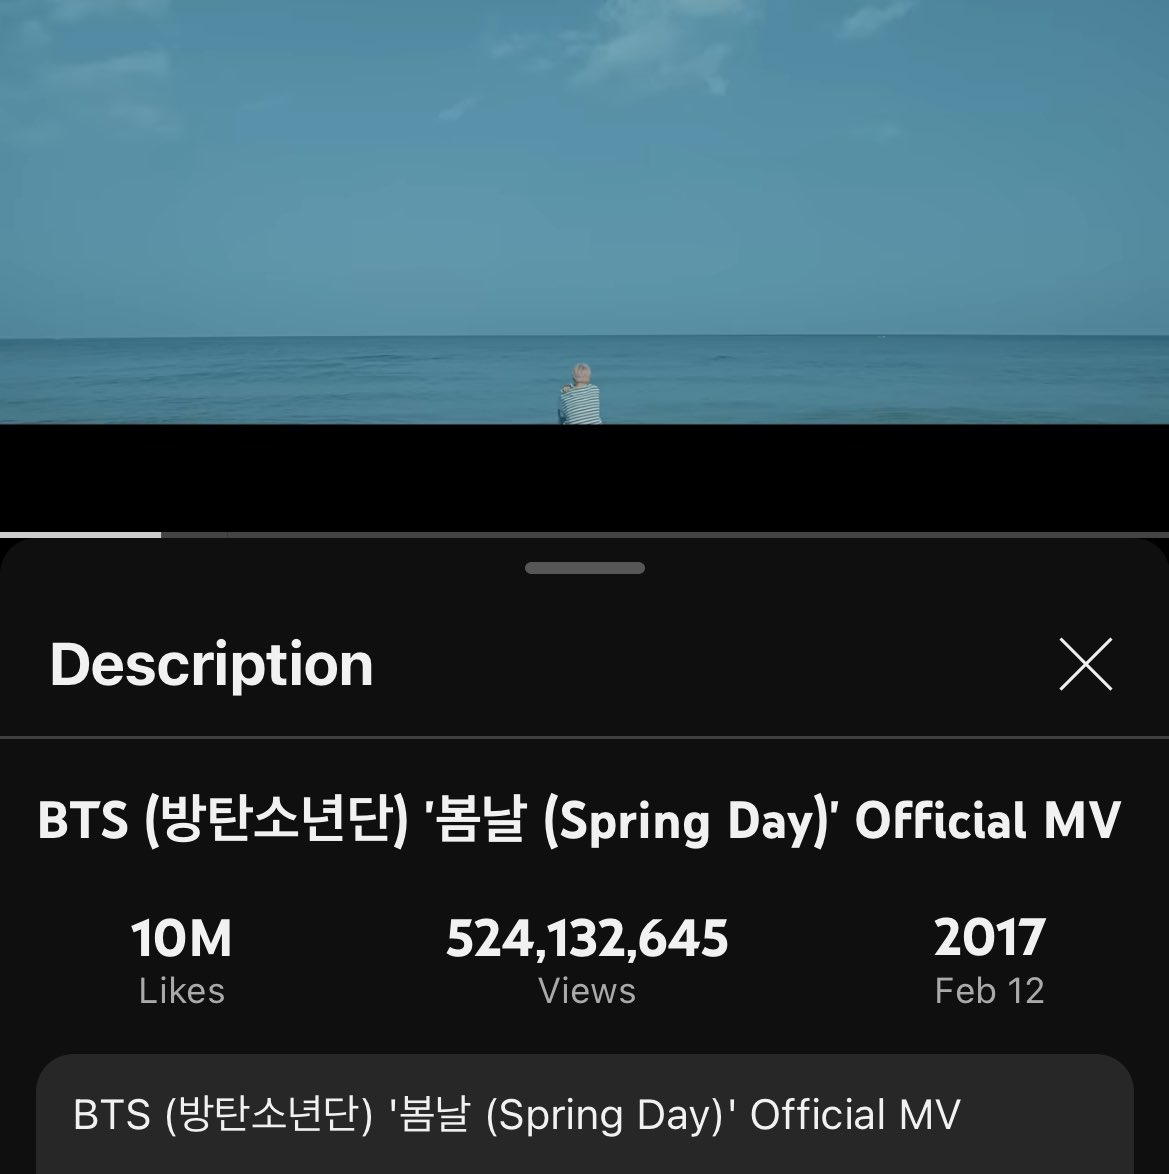 Ohhhh! Easiest thing I-ARMY can do is watch Spring Day MV on YouTube to try and help Spring Day win next week’s music show! Let’s go! Spread the word, and share a screenshot of your streaming! 💜 Let’s see what we can do 💜 youtu.be/xEeFrLSkMm8?si…